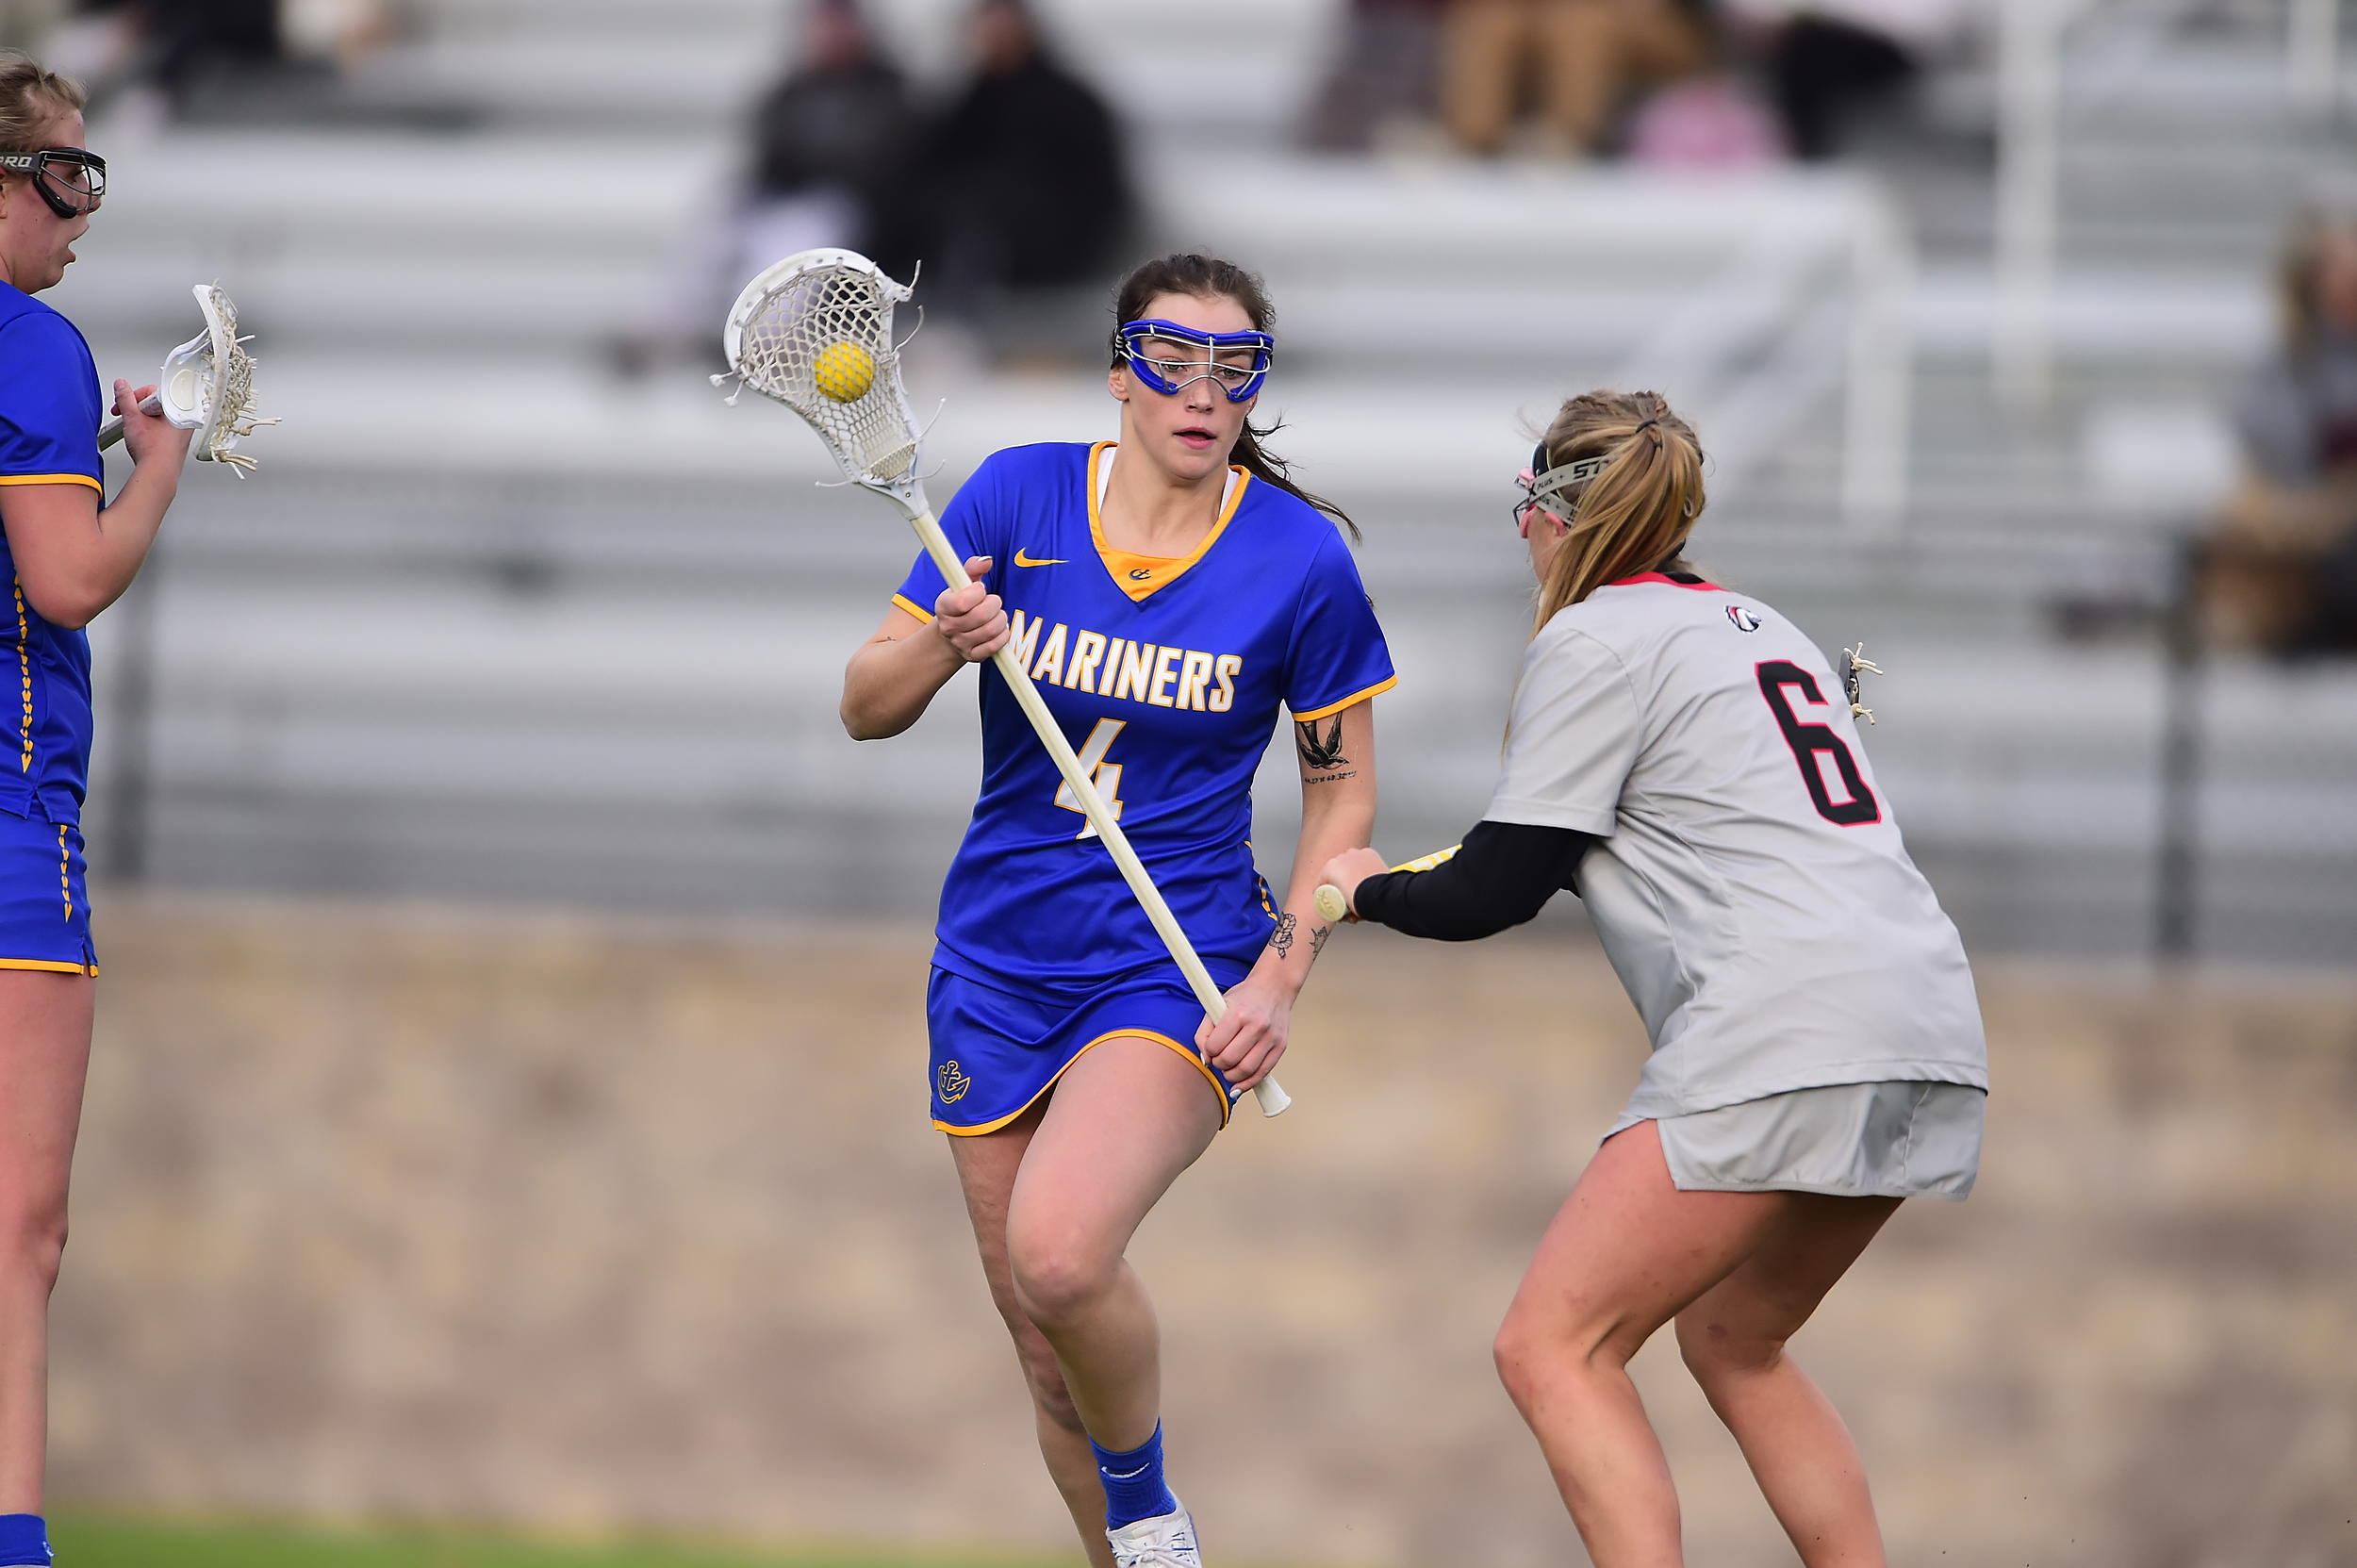 Former Trojan Lily Cook Playing Women's Lax at MMA